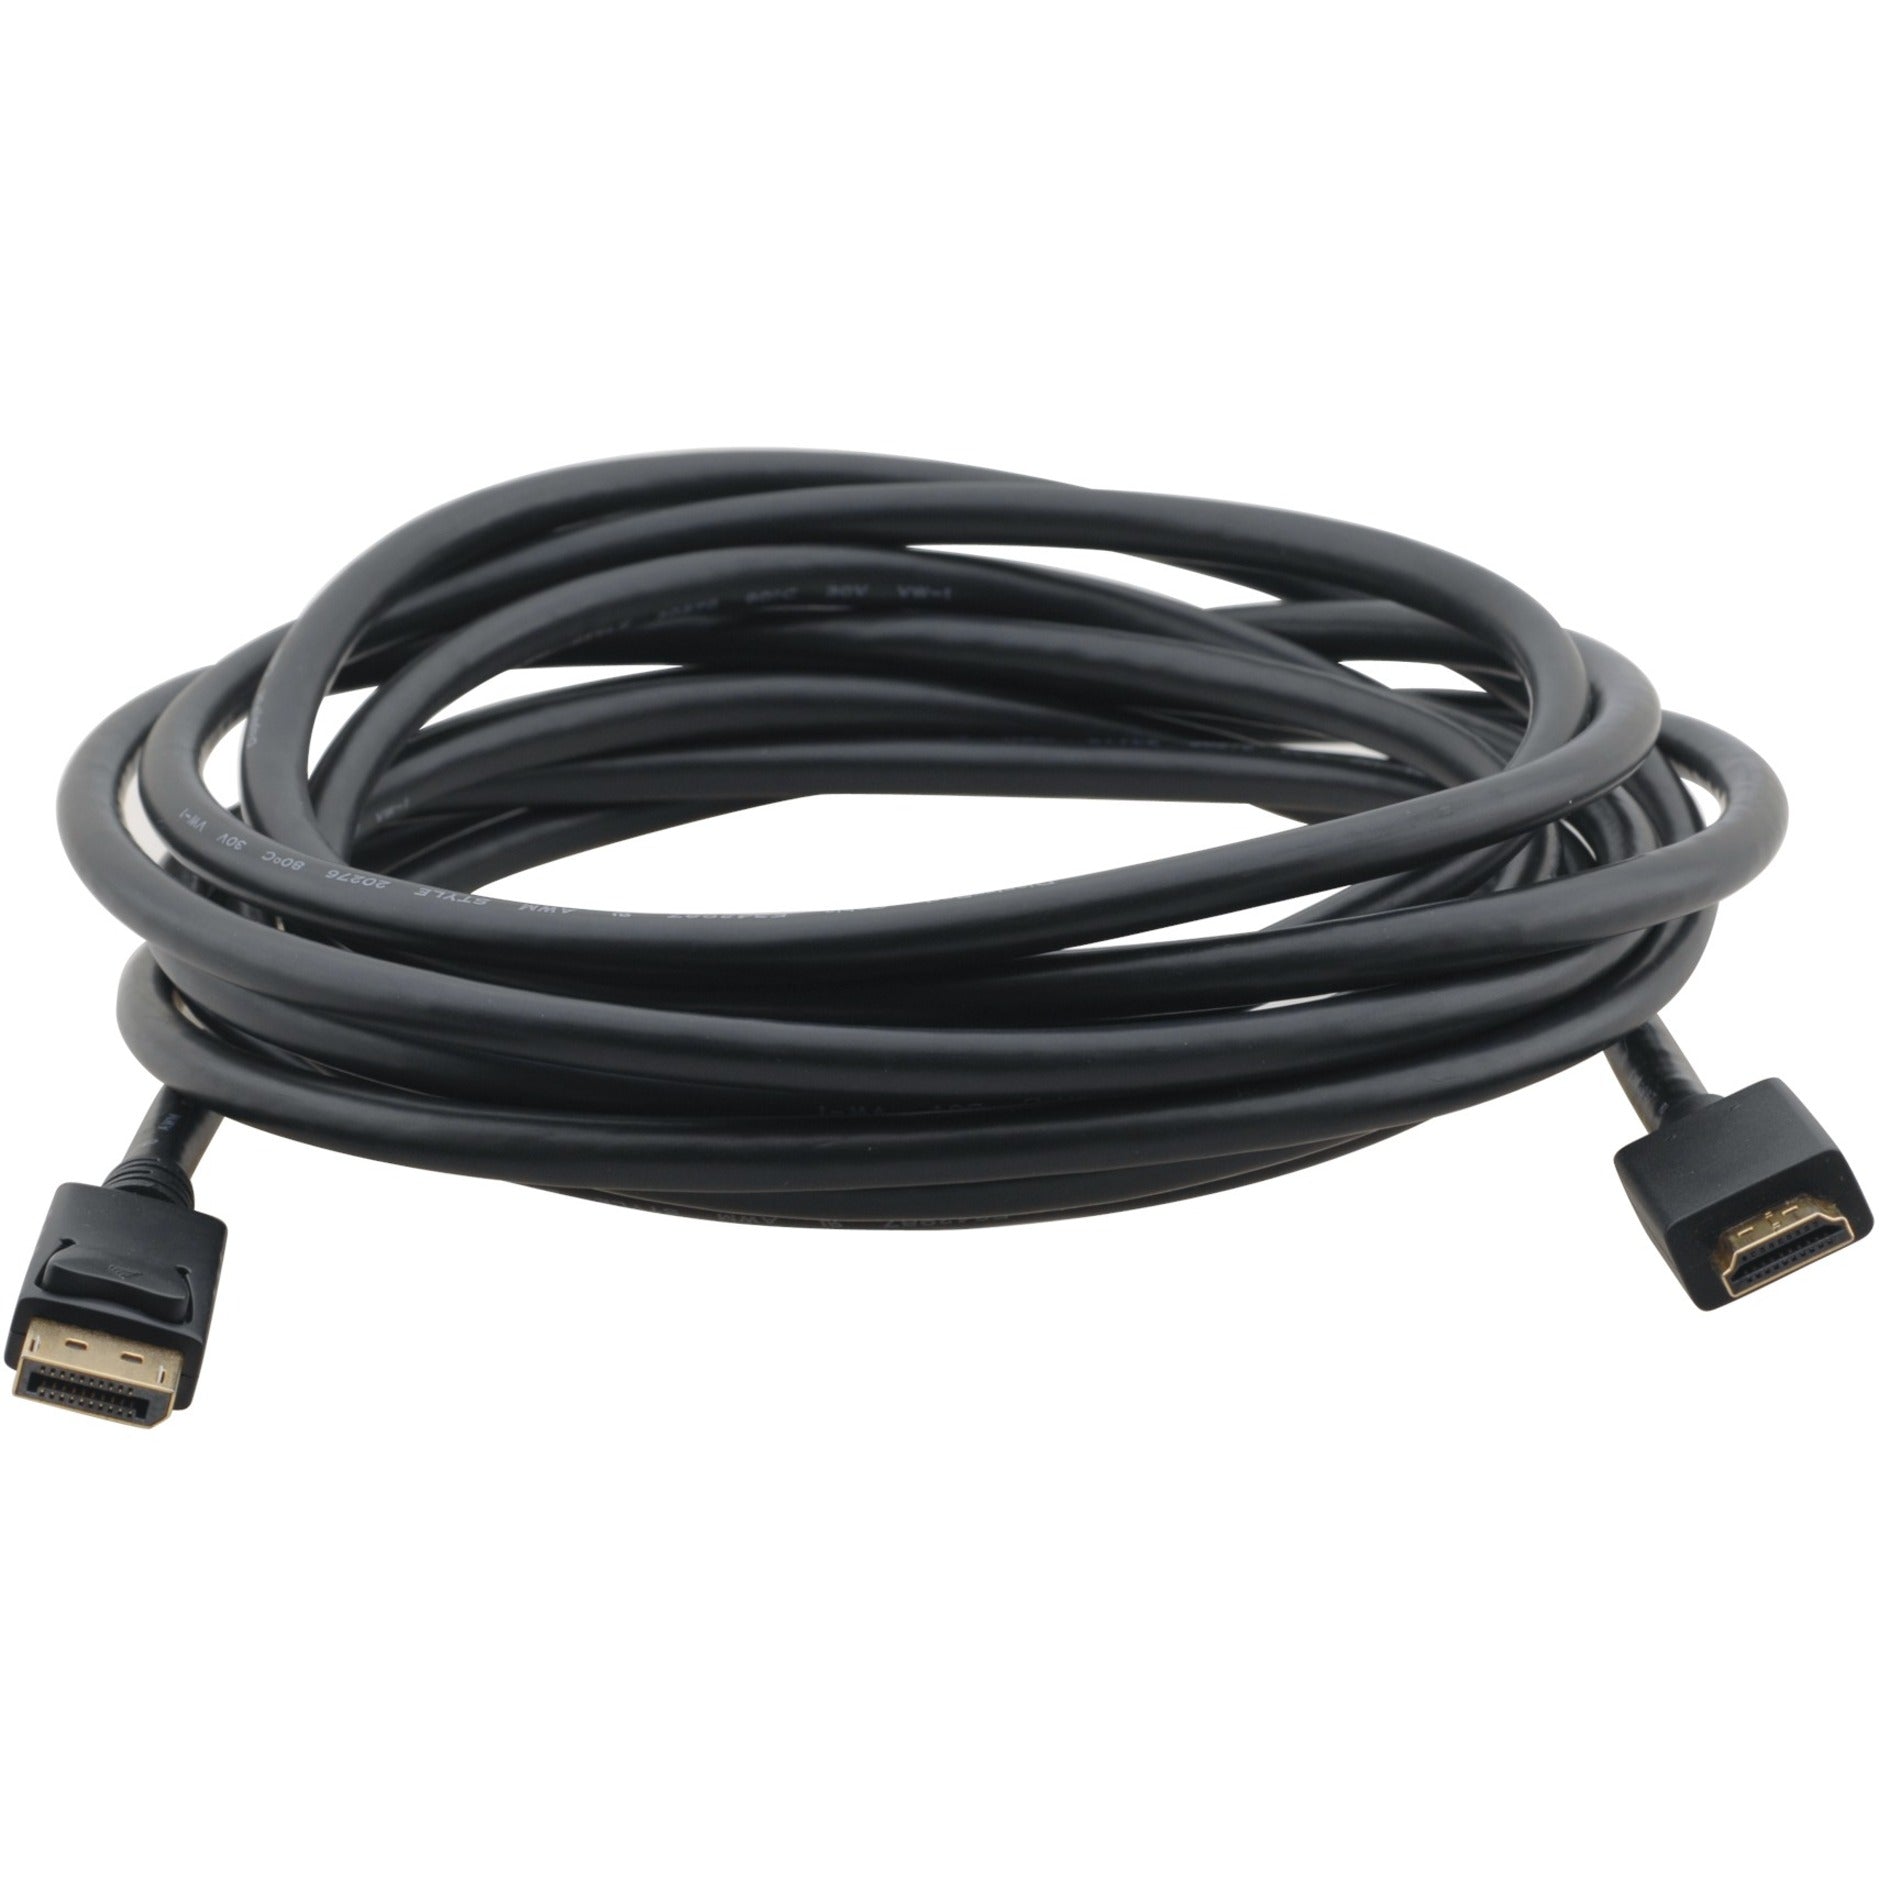 Kramer 97-0601010 DisplayPort (M) to HDMI (M) Cable, 10 ft, Copper Conductor